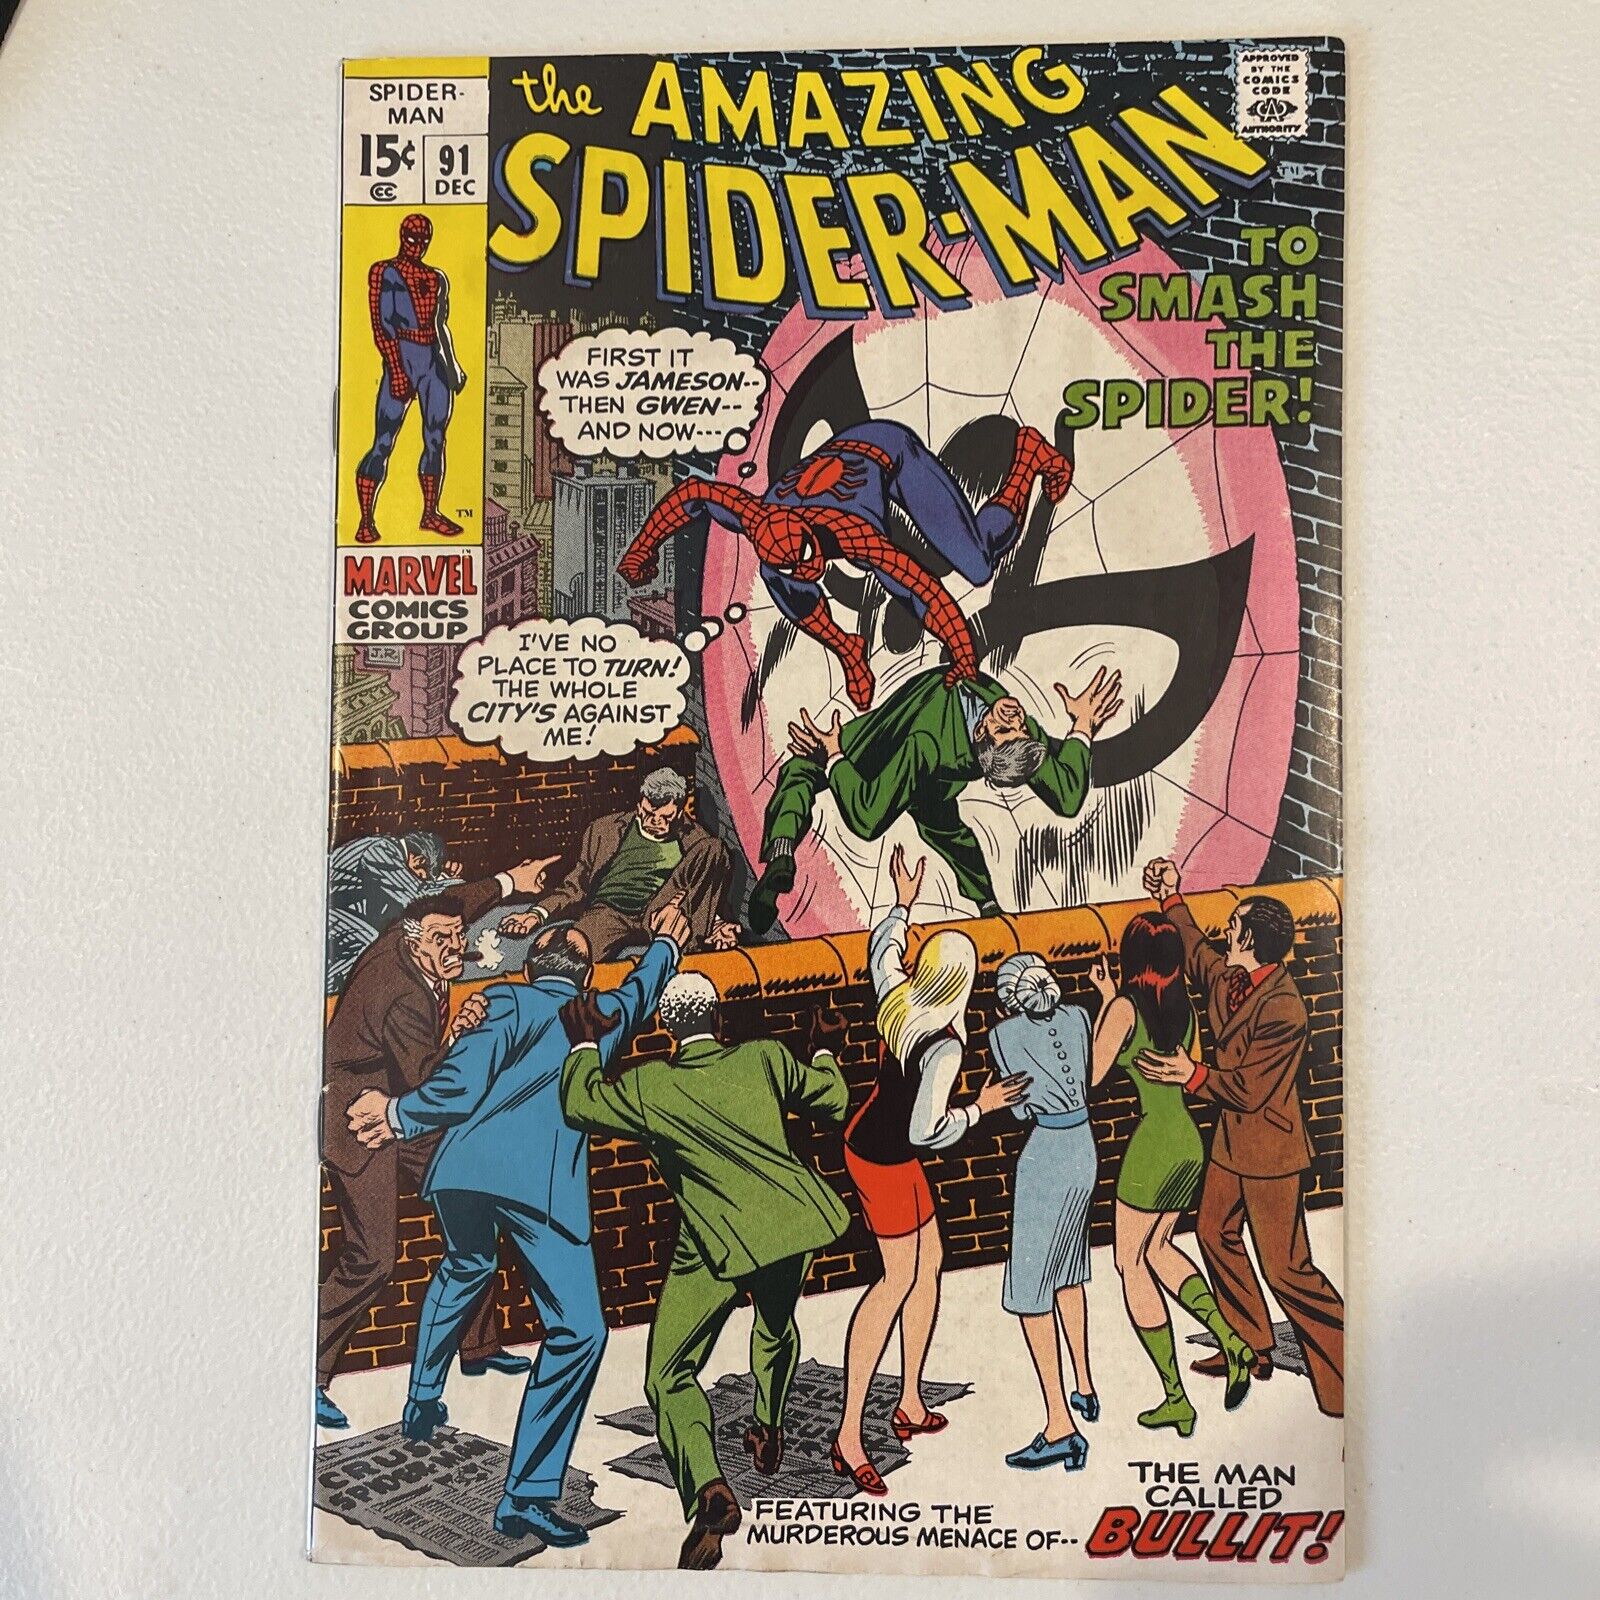 Wow Take A Look AMAZING SPIDER-MAN #91 STAN LEE STORY JOHN ROMITA COVER